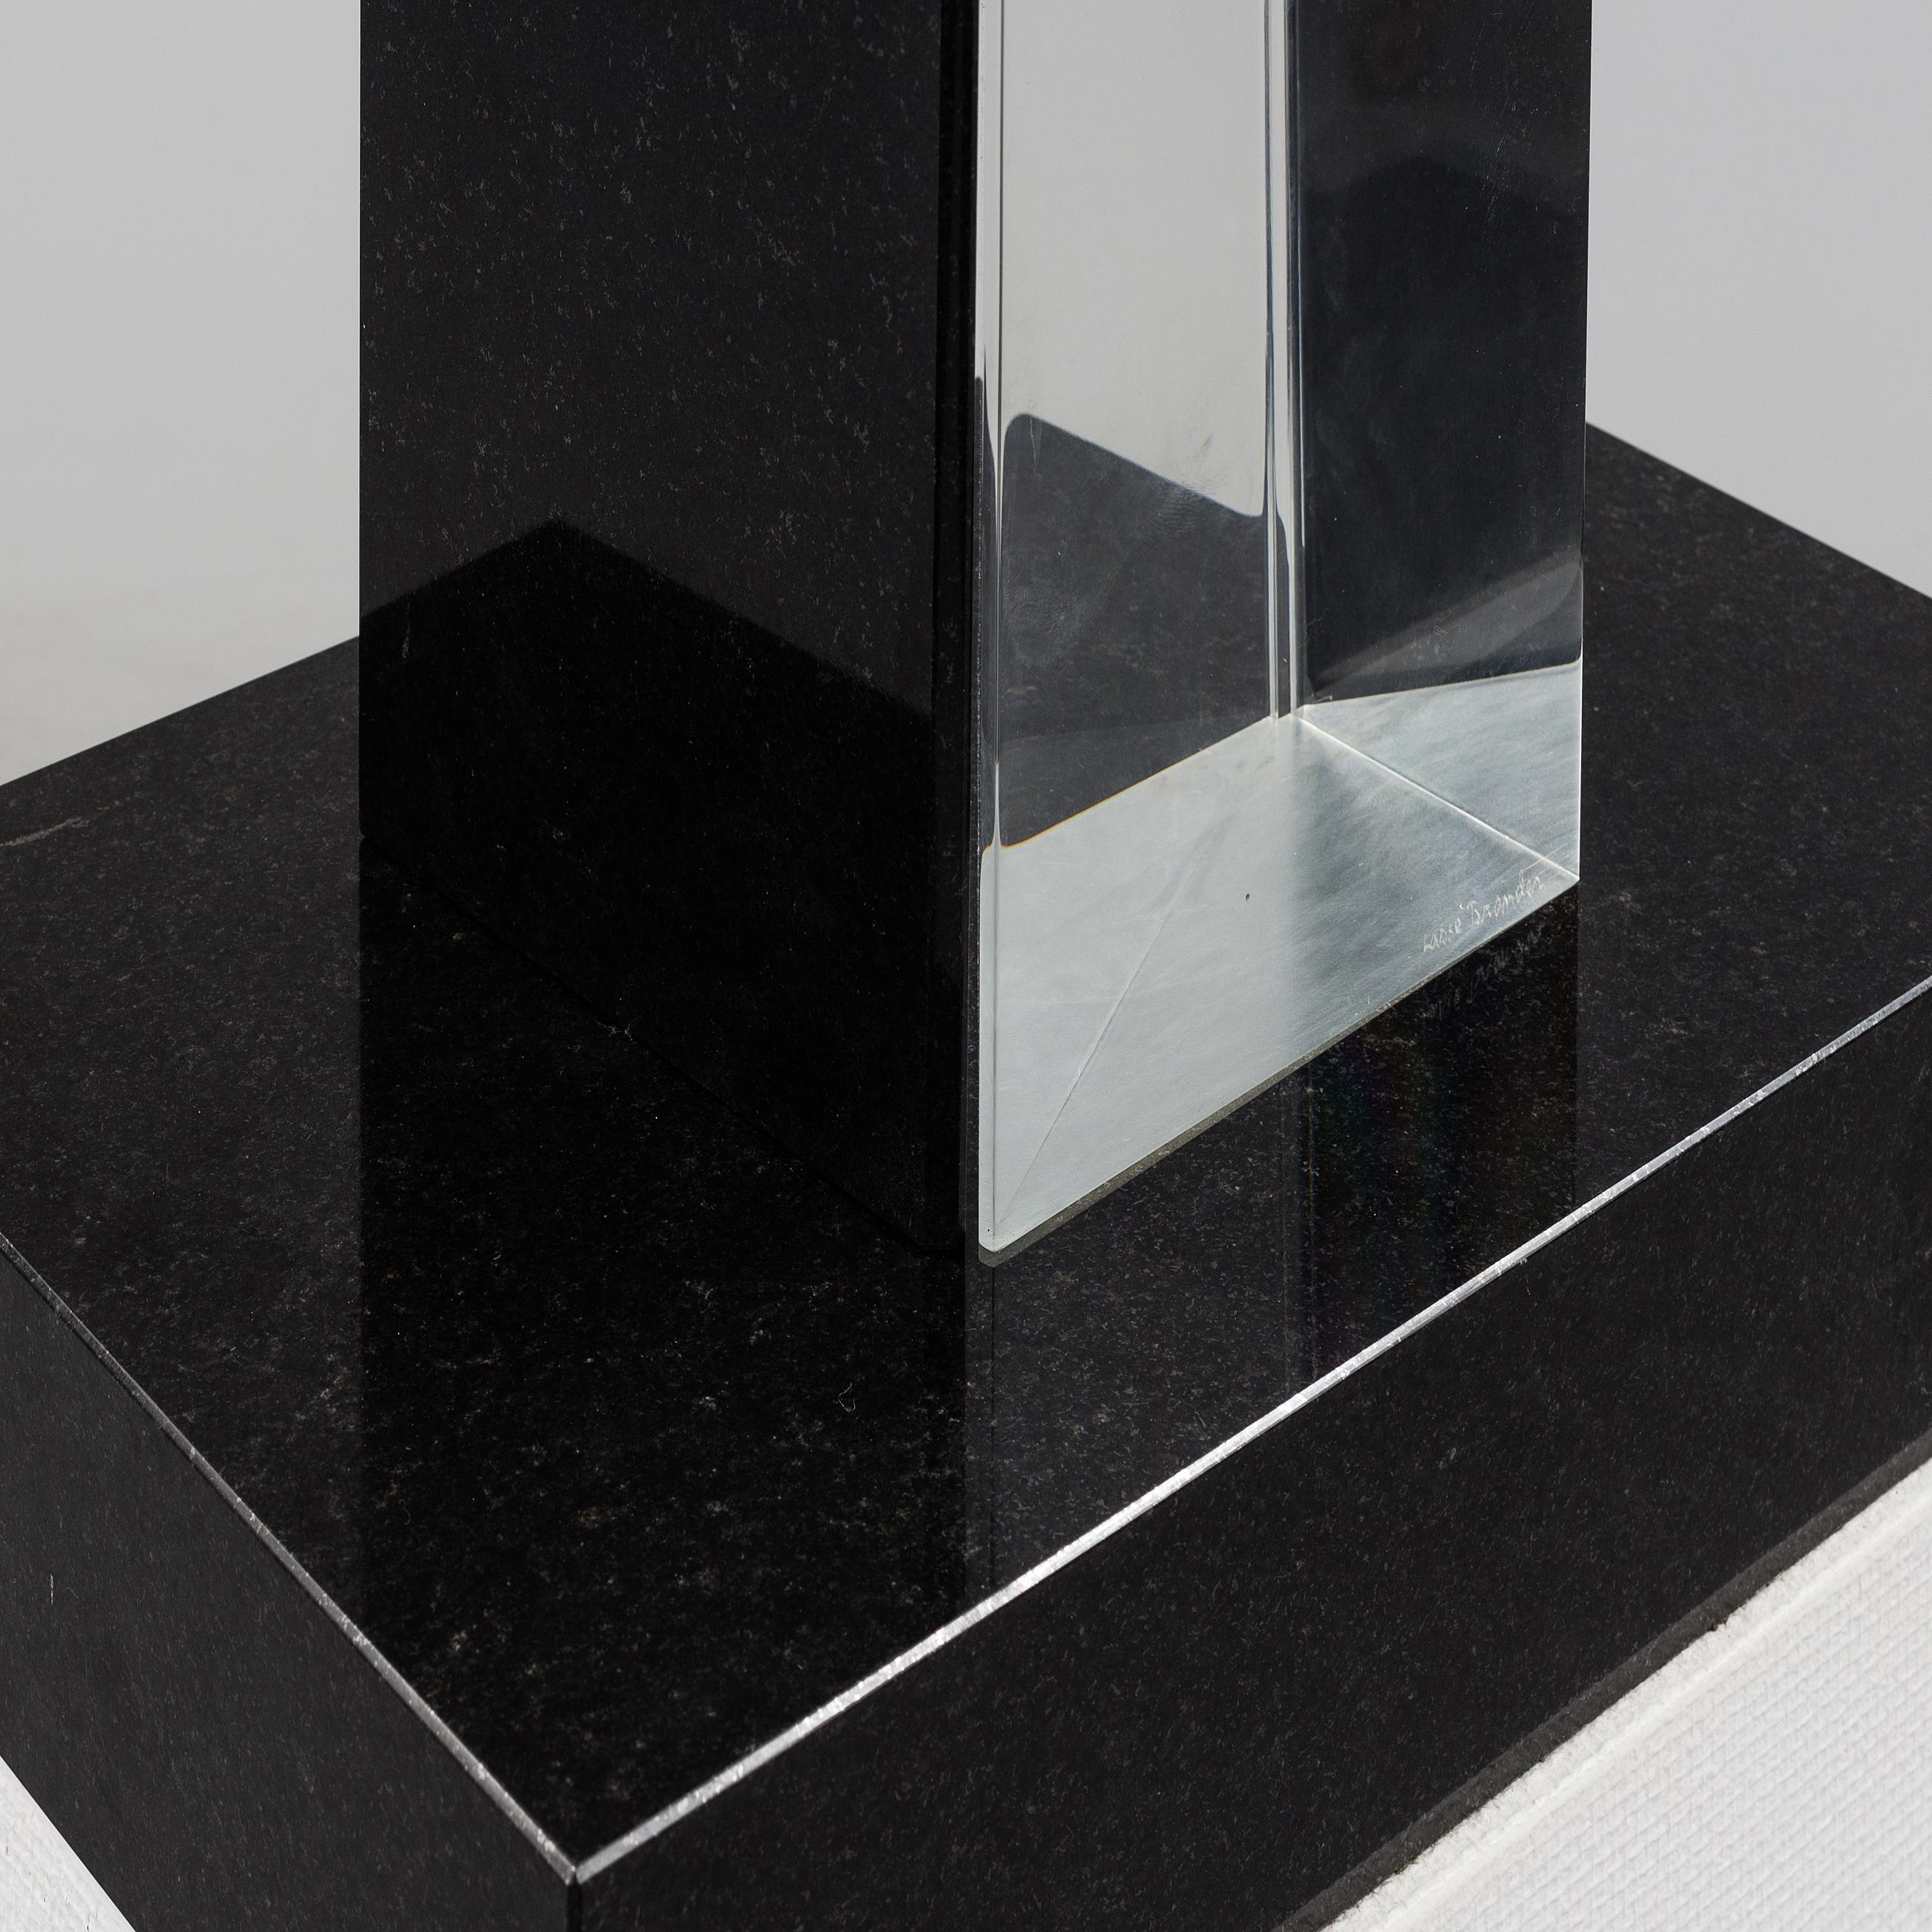 Unique piece 1980's sculpture by Swedish artist Lasse Brander (1930-2 008)

Impressive glass and stone sculpture on a pedestal Total hight 172 cm ( 67,7 inches) made of 2 